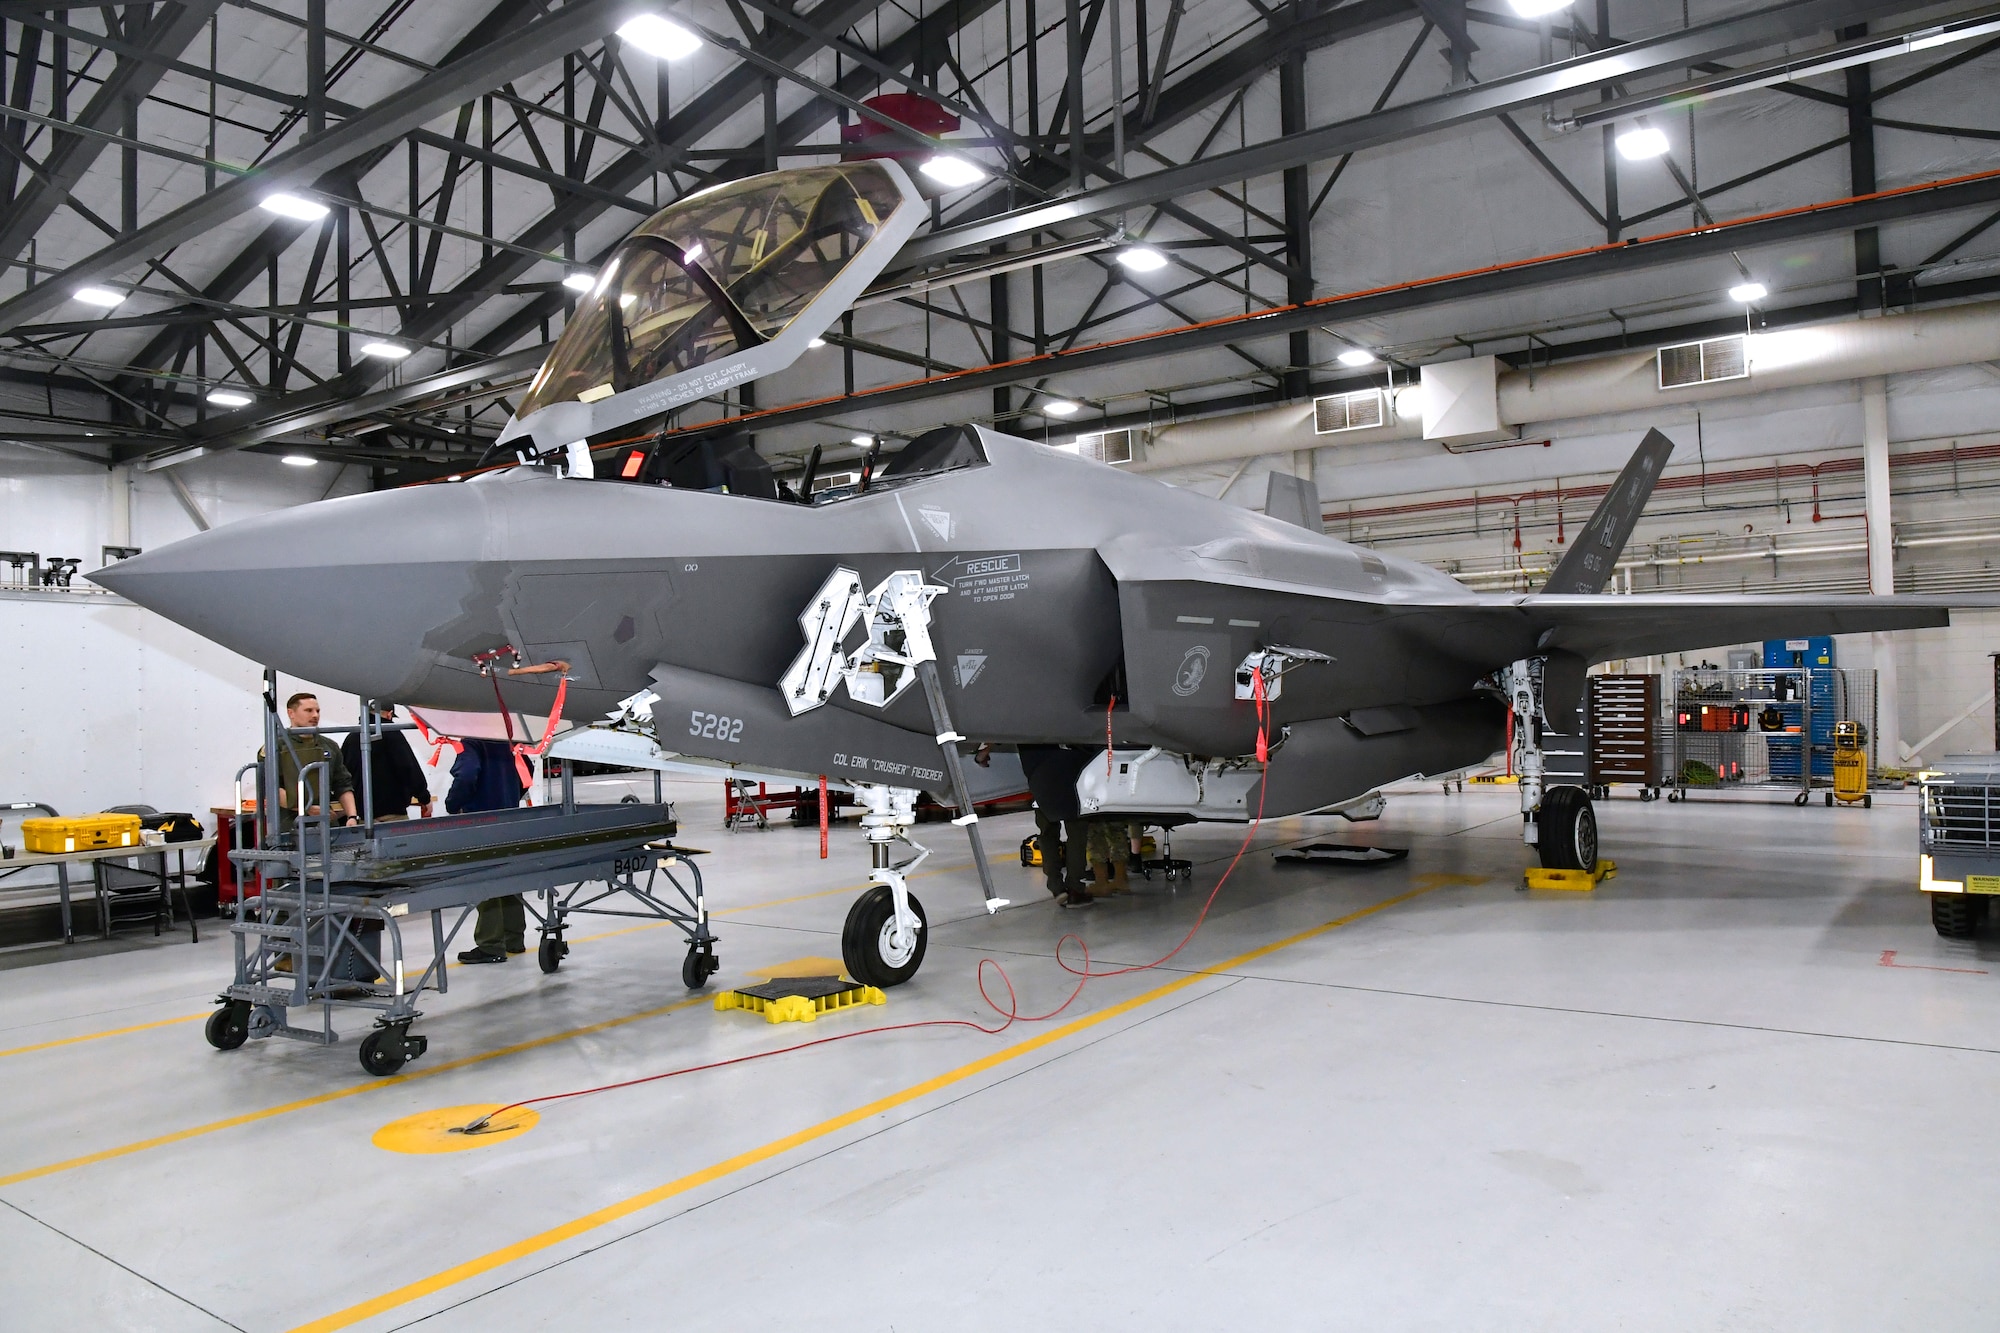 Qrip Equipped Caf F 35s Set The Stage For Future Crowd Sourced Flight Data Platform Integration Air Force Article Display